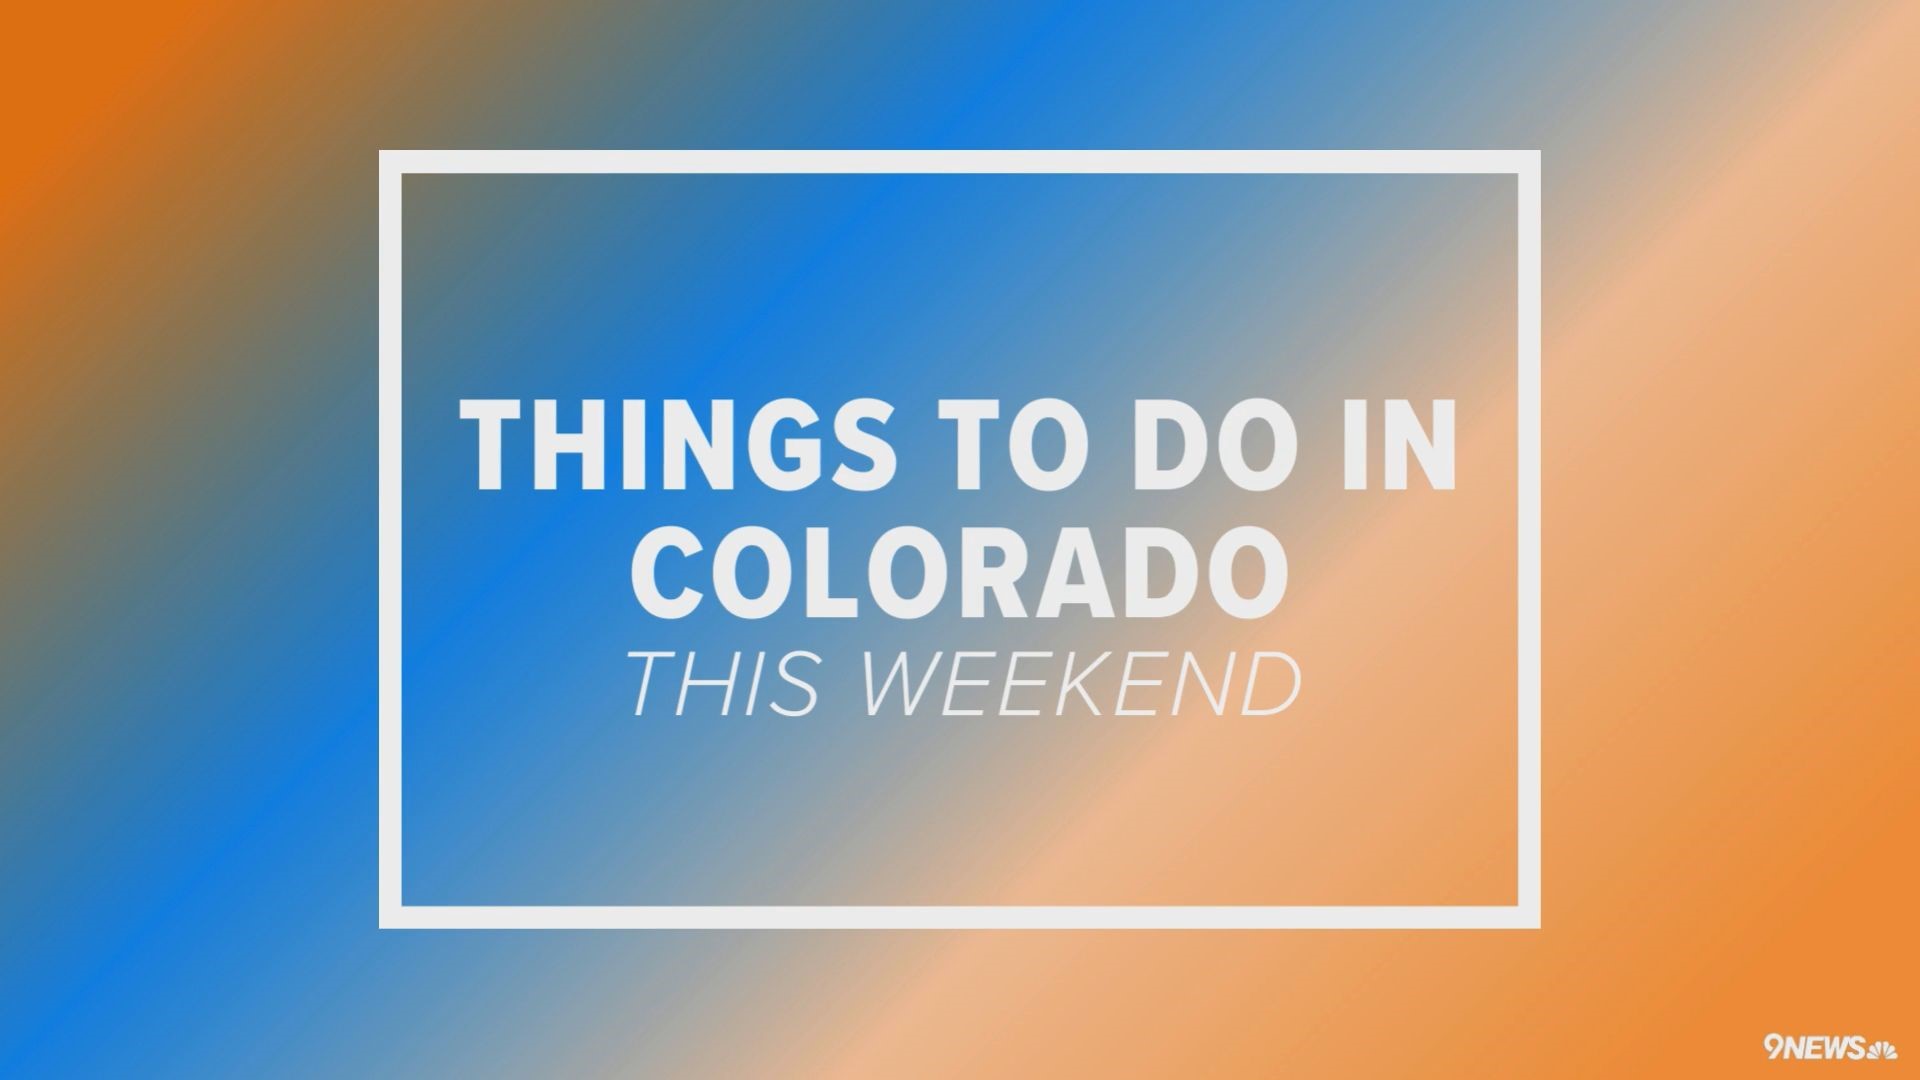 From fairs and festivals to dinosaurs and 'Hairspray,' there's lots to do, see and explore in Denver and Colorado this March weekend.